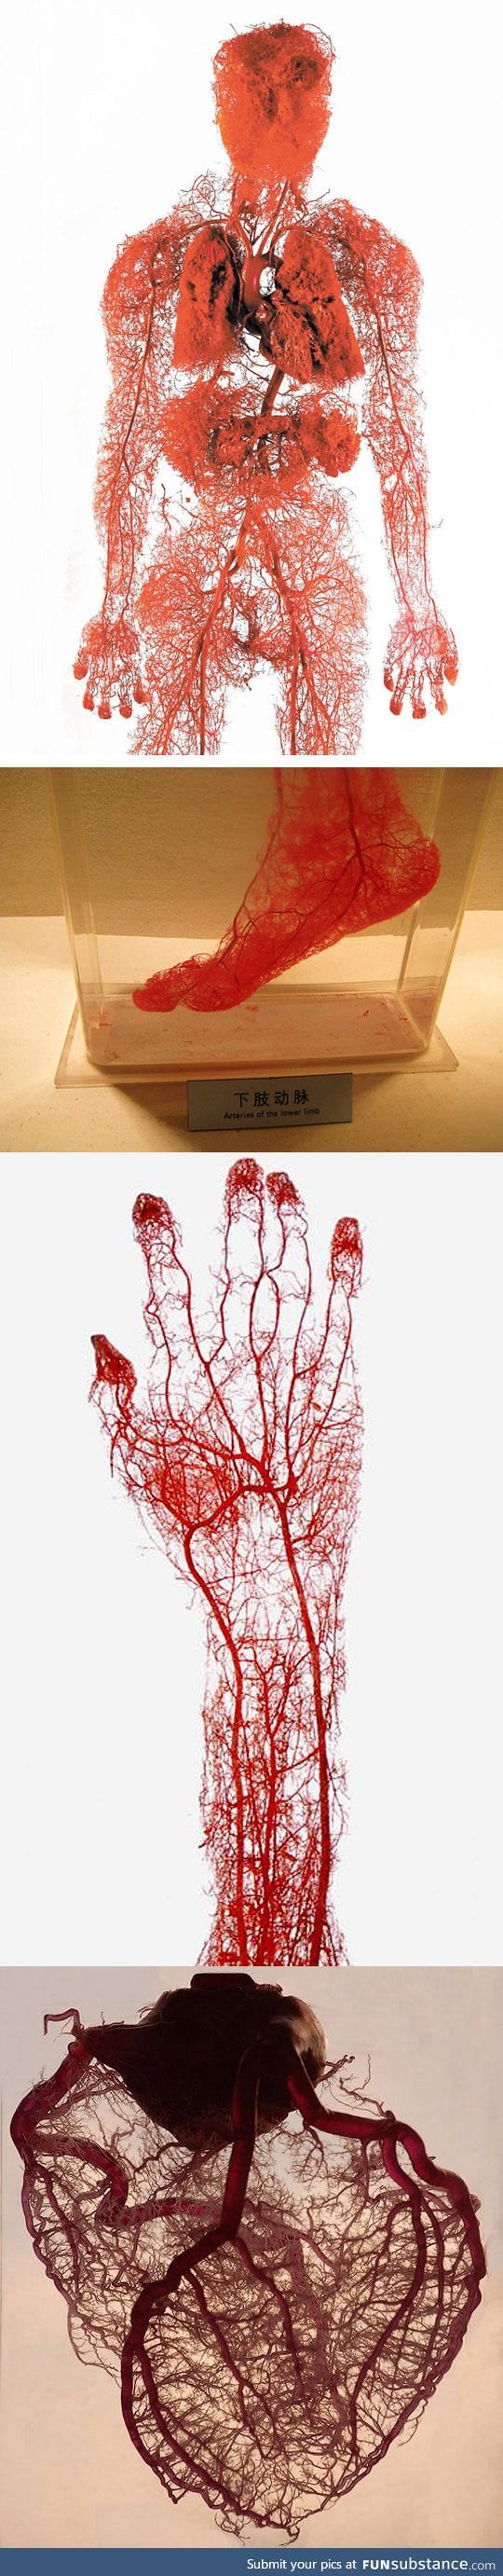 Photos of blood vessels in the human body